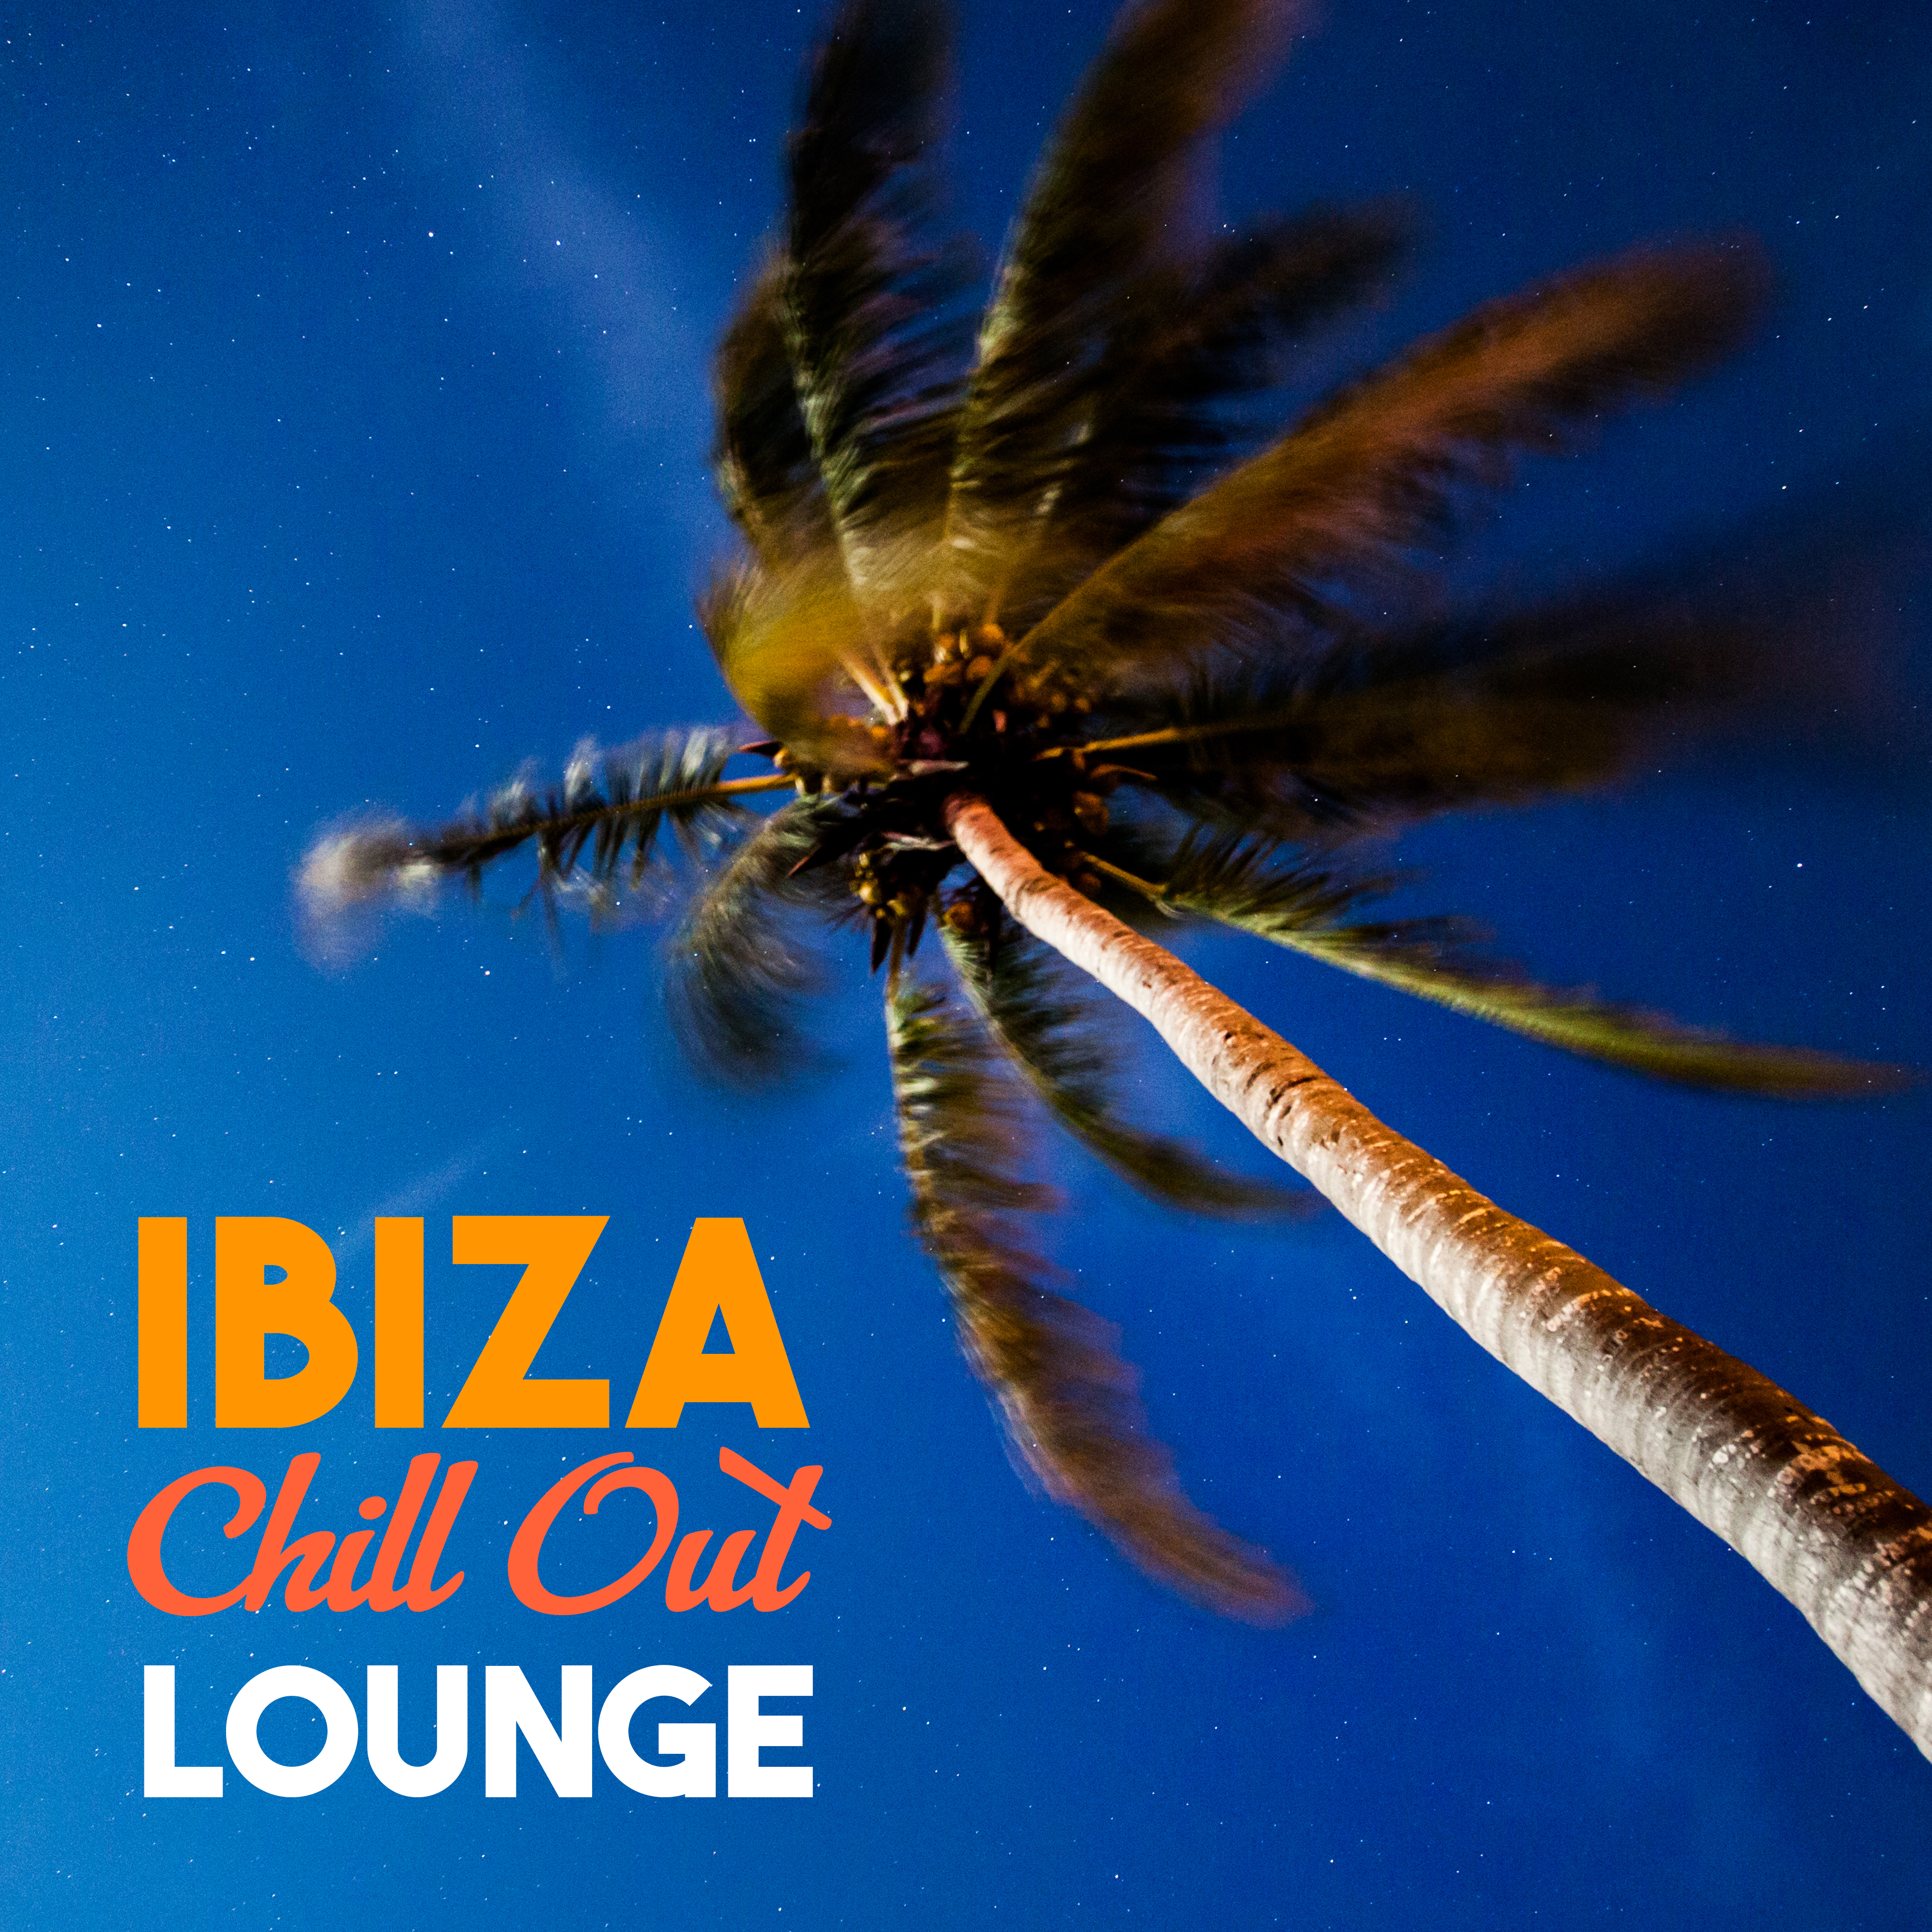 Ibiza Chill Out Lounge  Soft Music for Ibiza Relaxation, Summer Sun, Best Chill Out Music